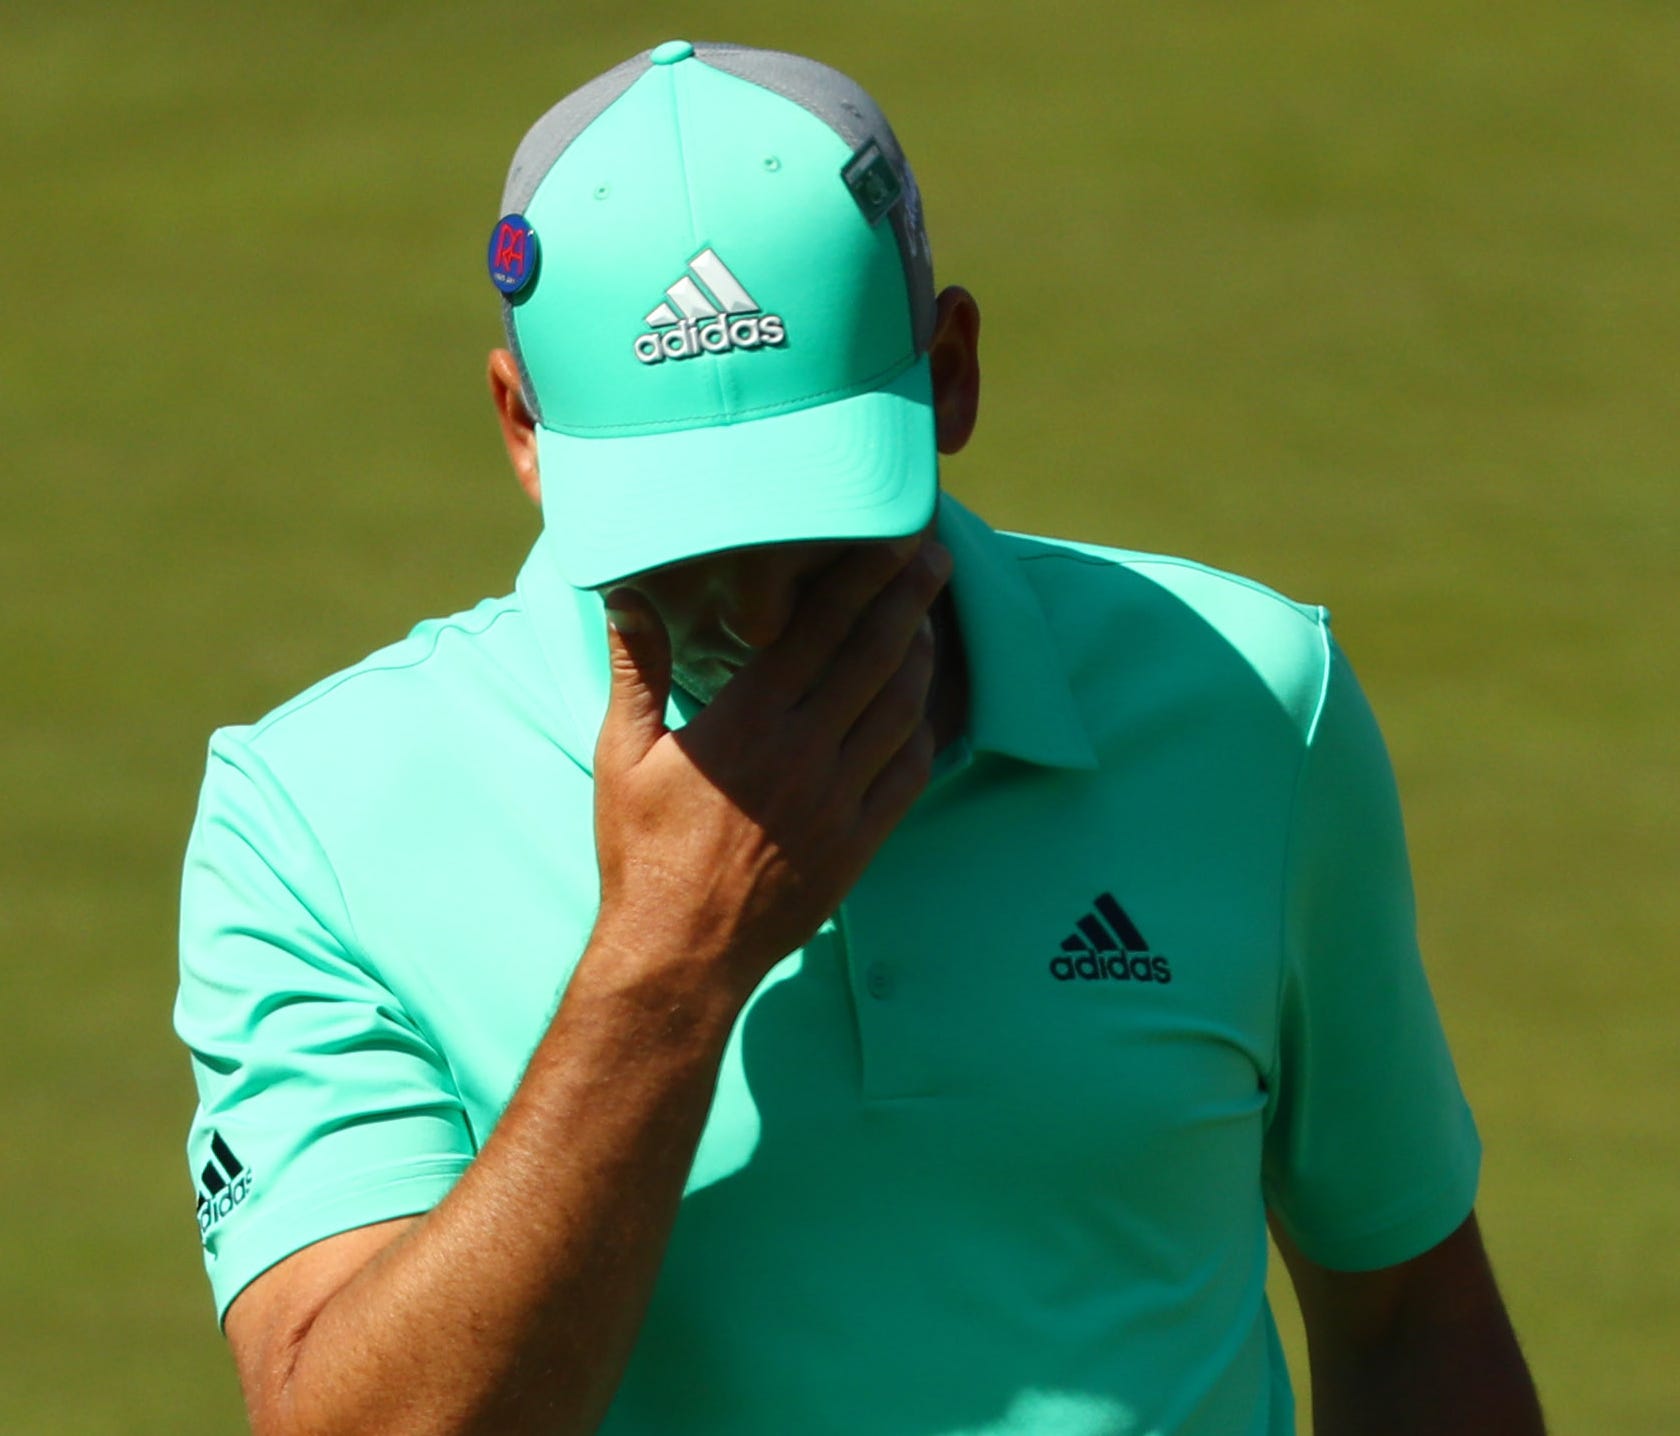 Sergio Garcia put five balls in the water on the 15th before finally notching an 8-over on the hole.